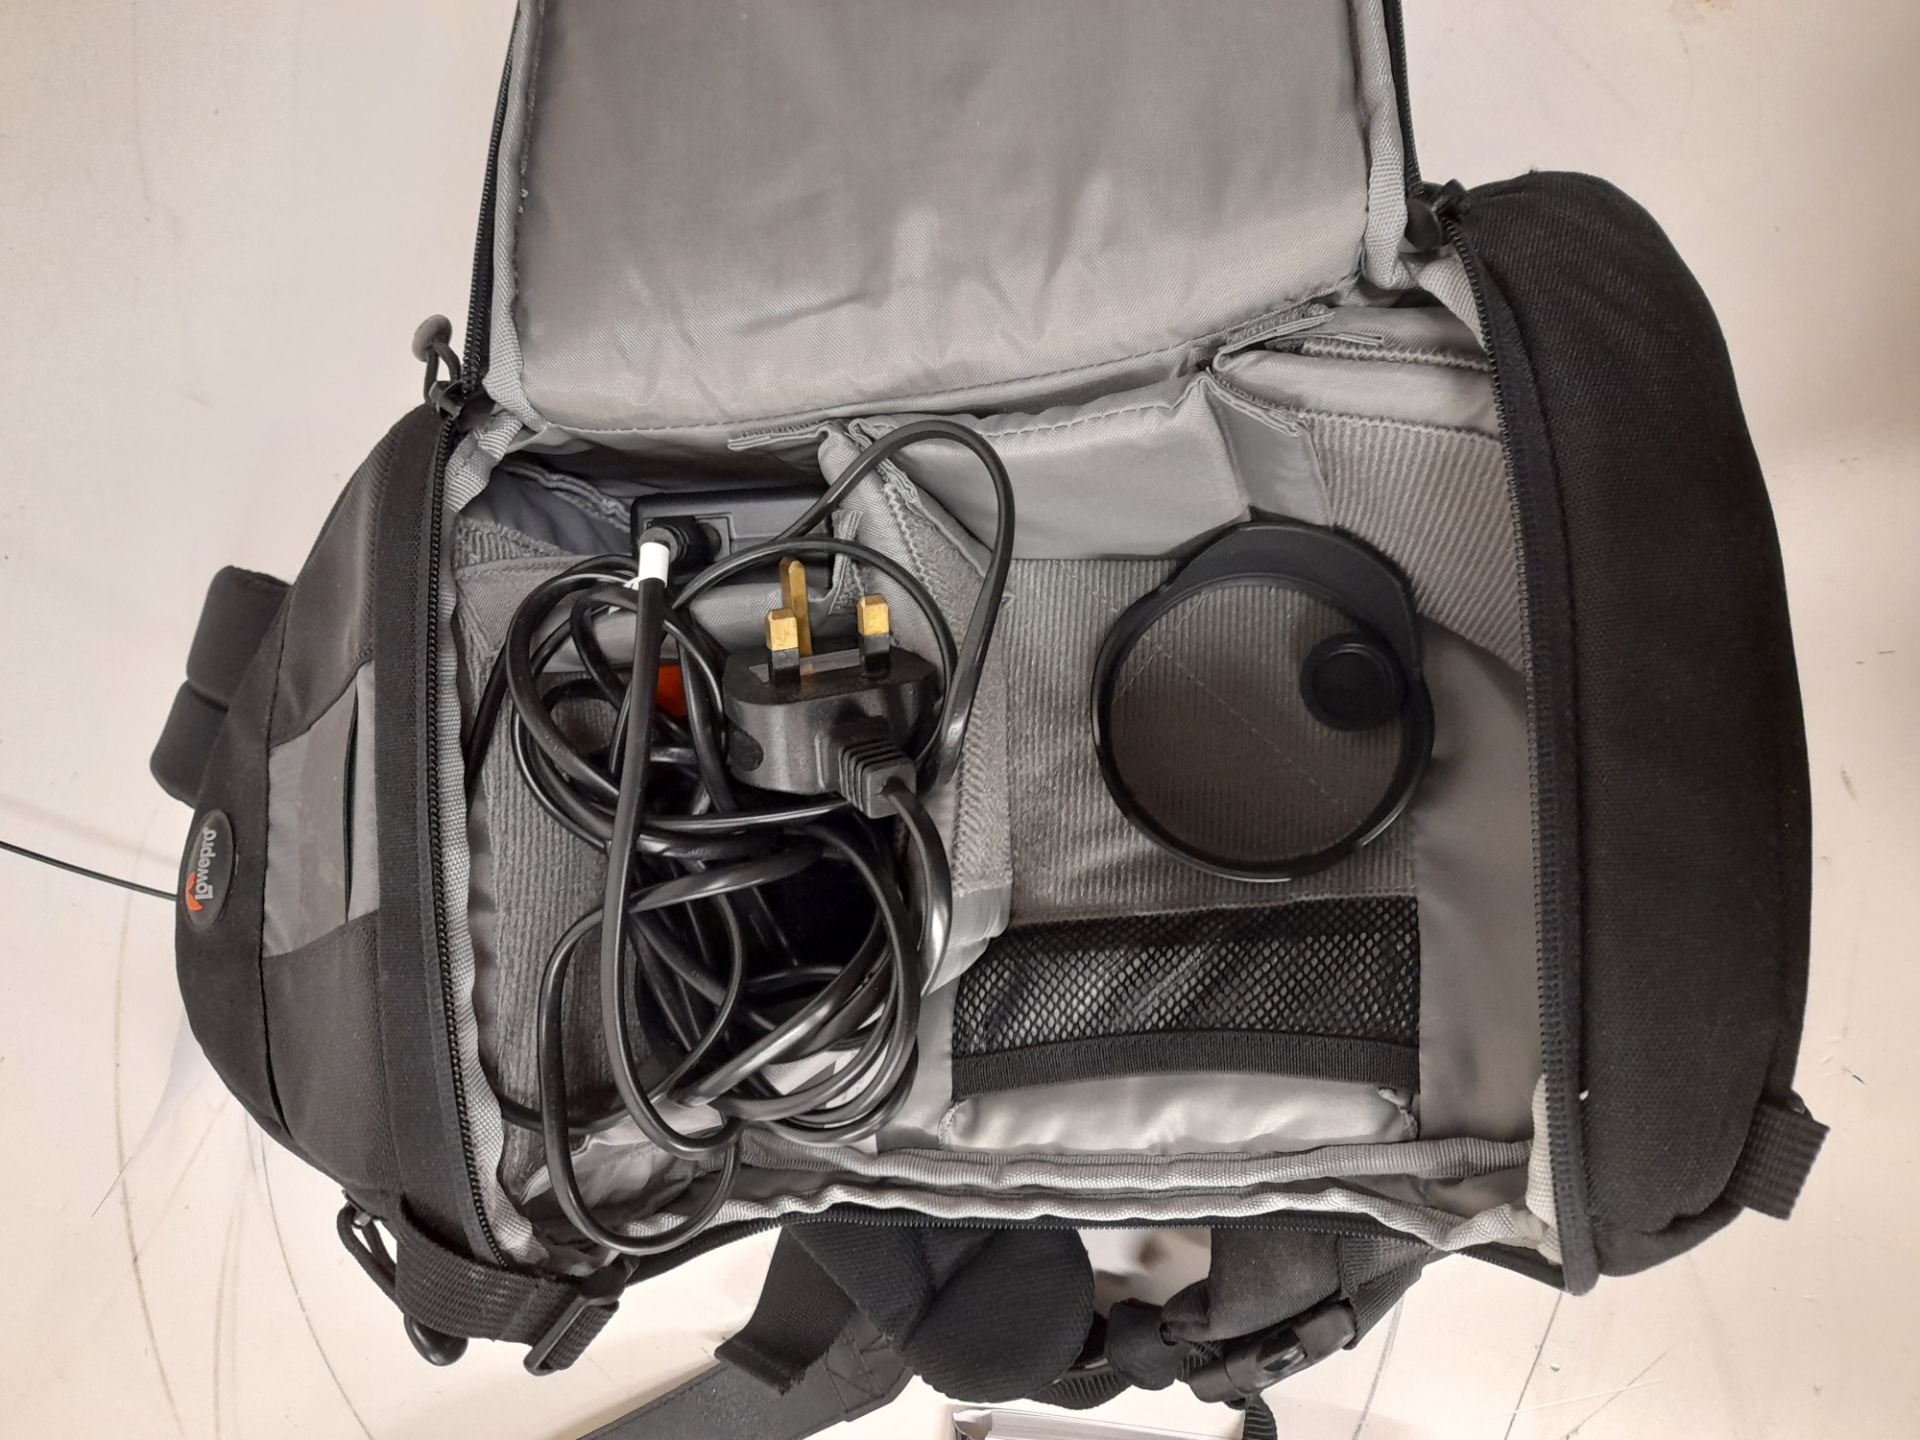 Nikon D810 Digital Camera with bag and charger - Image 7 of 10